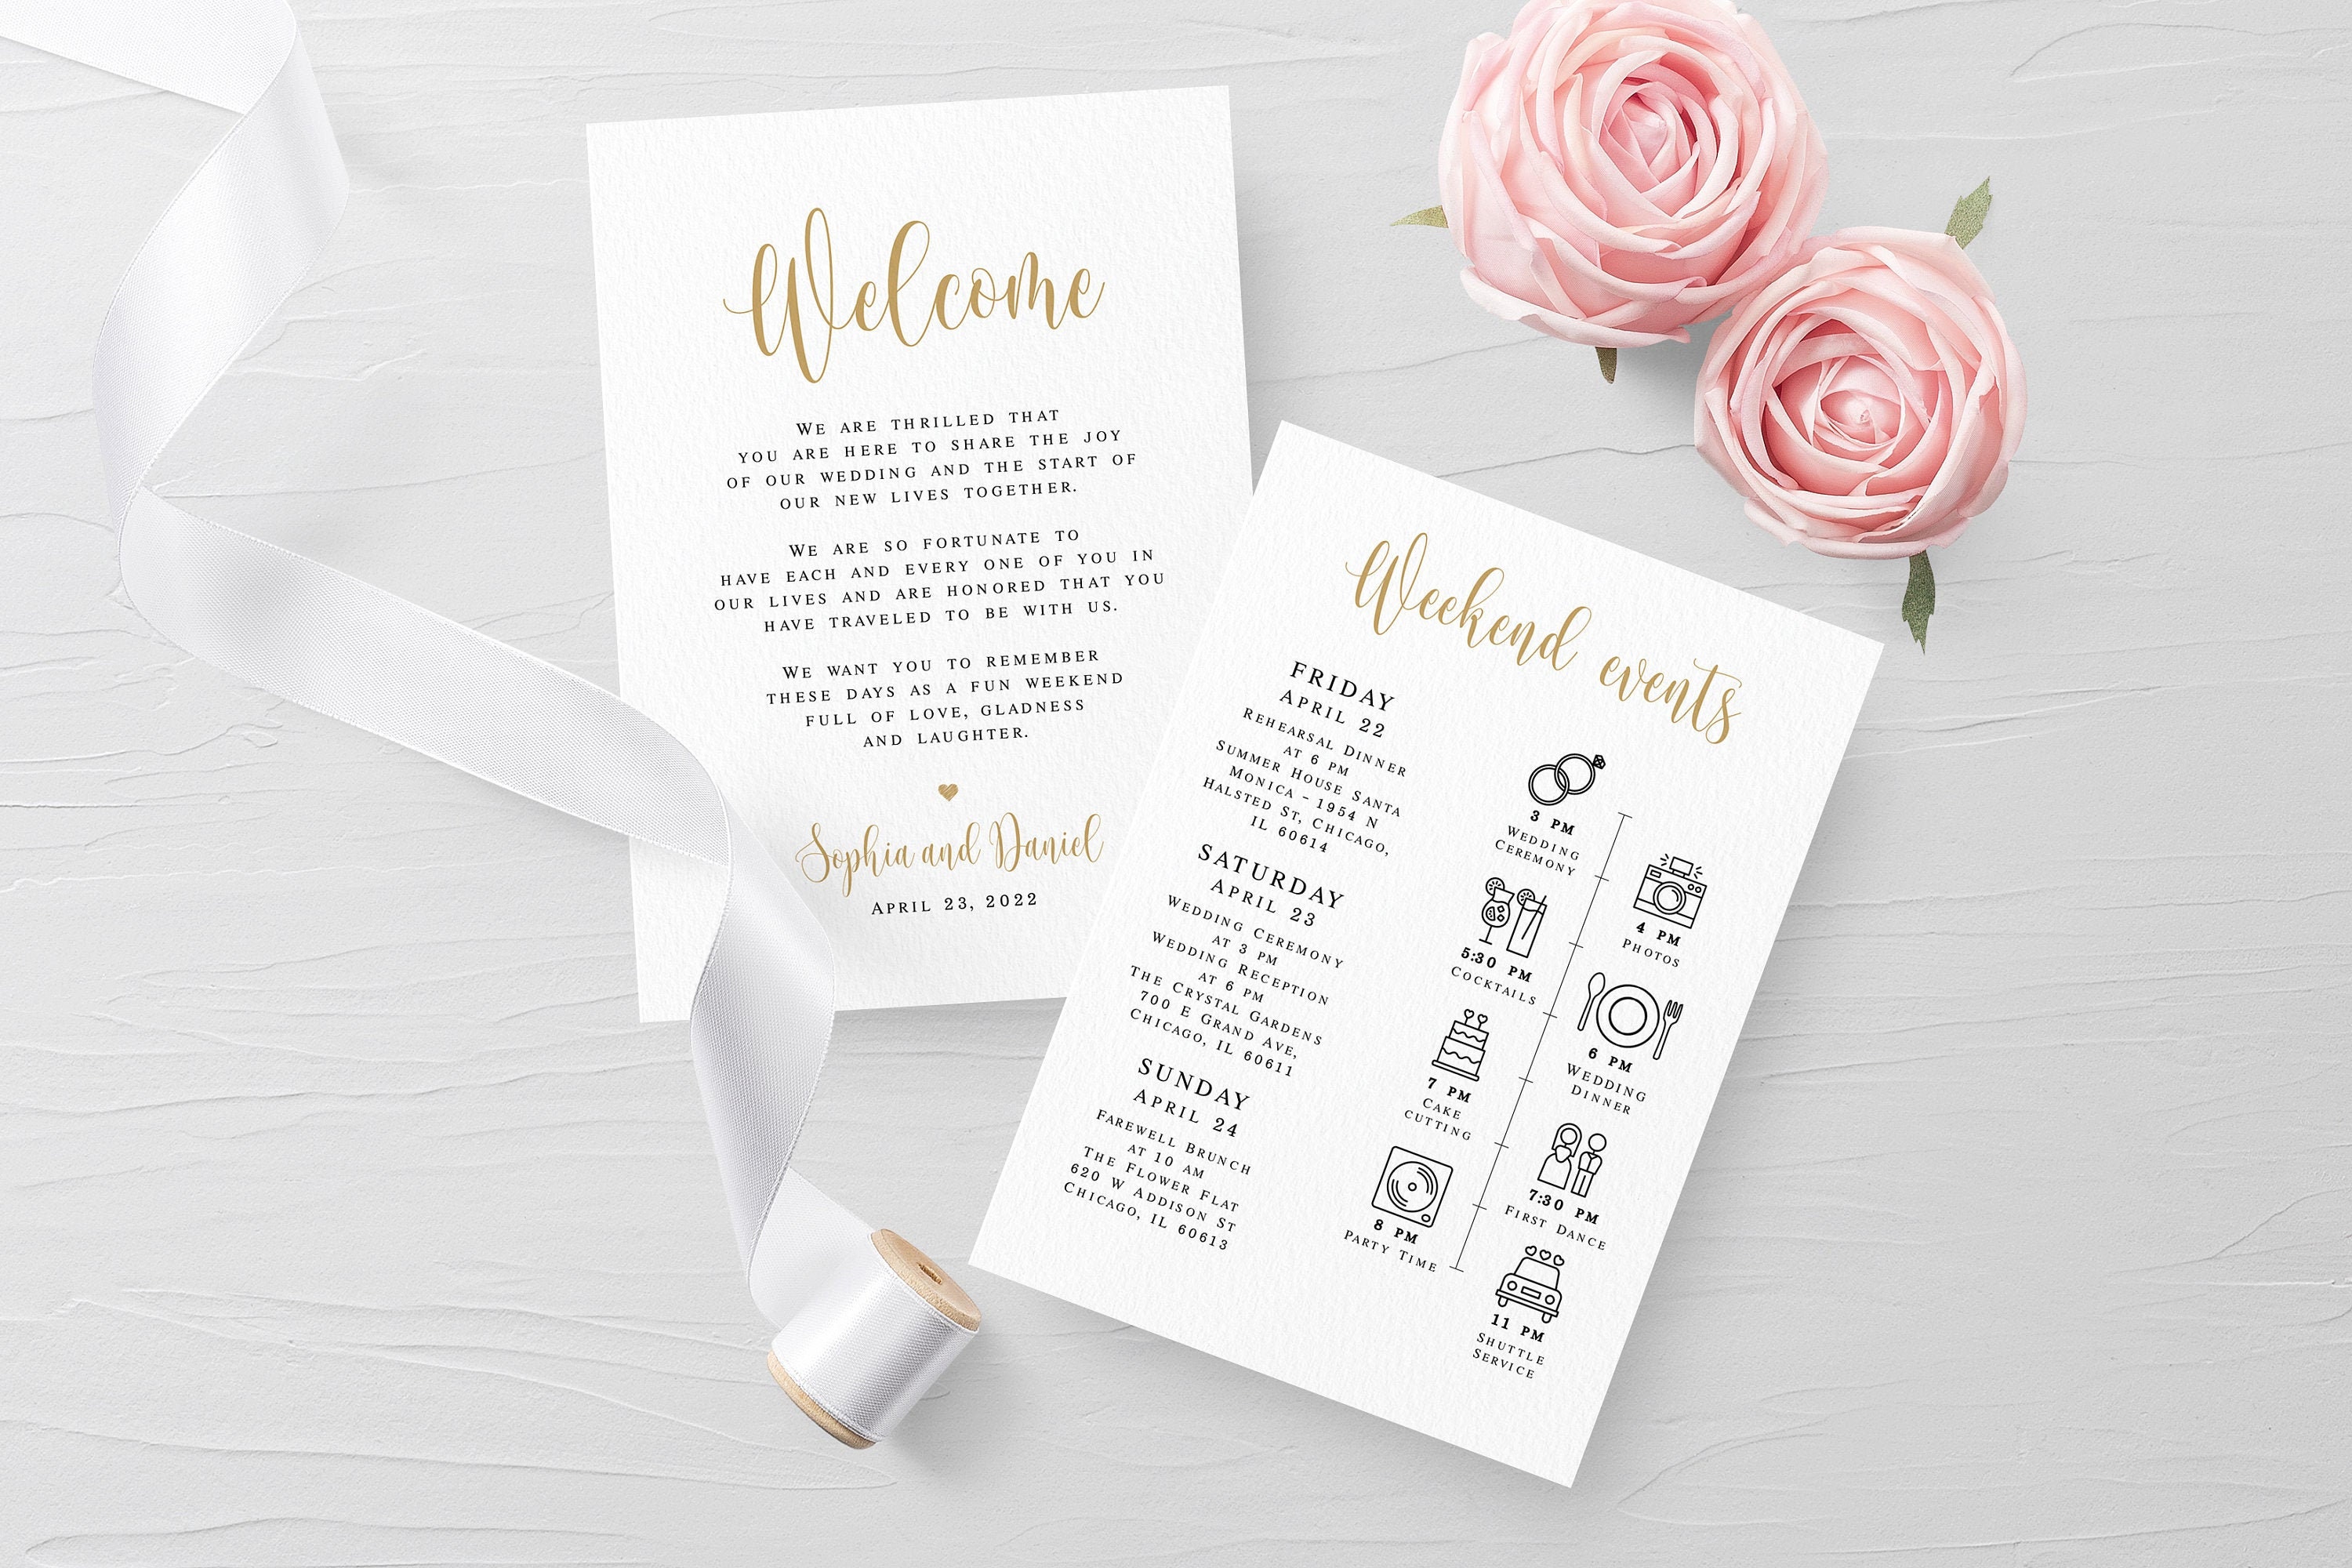 Wedding Welcome Bag Letter Insert, Welcome Bag Note, Wedding Thank You,  Itinerary, Agenda, Instant Download, Editable, Templett #023-101WB